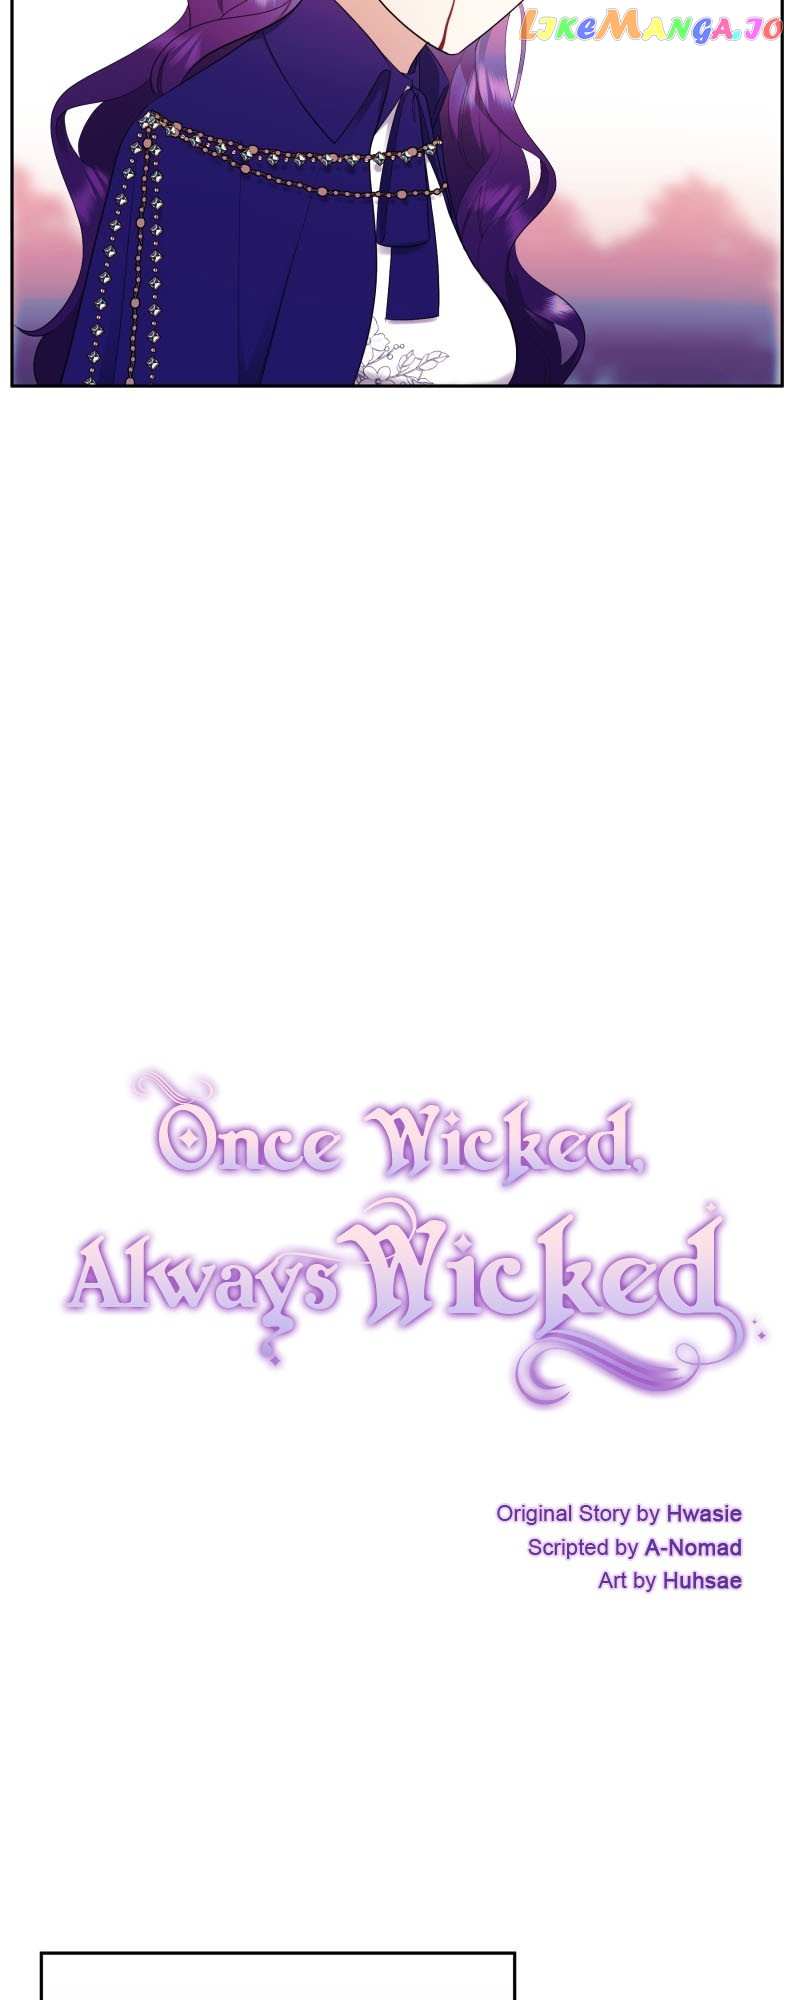 Once Wicked, Always Wicked - Page 3